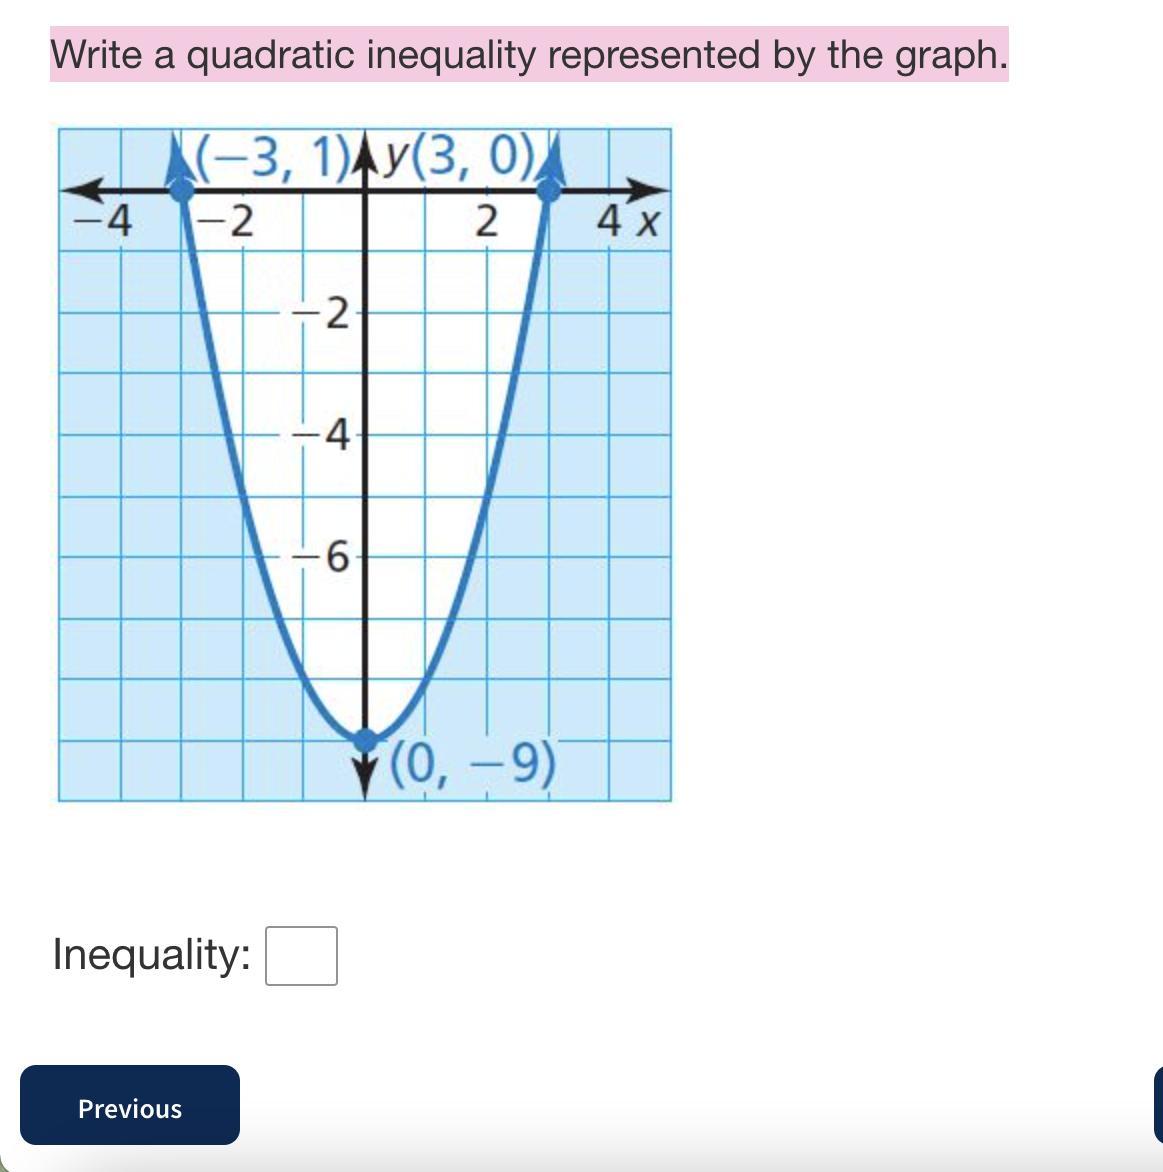 Write A Quadratic Inequality Represented By The Graph.